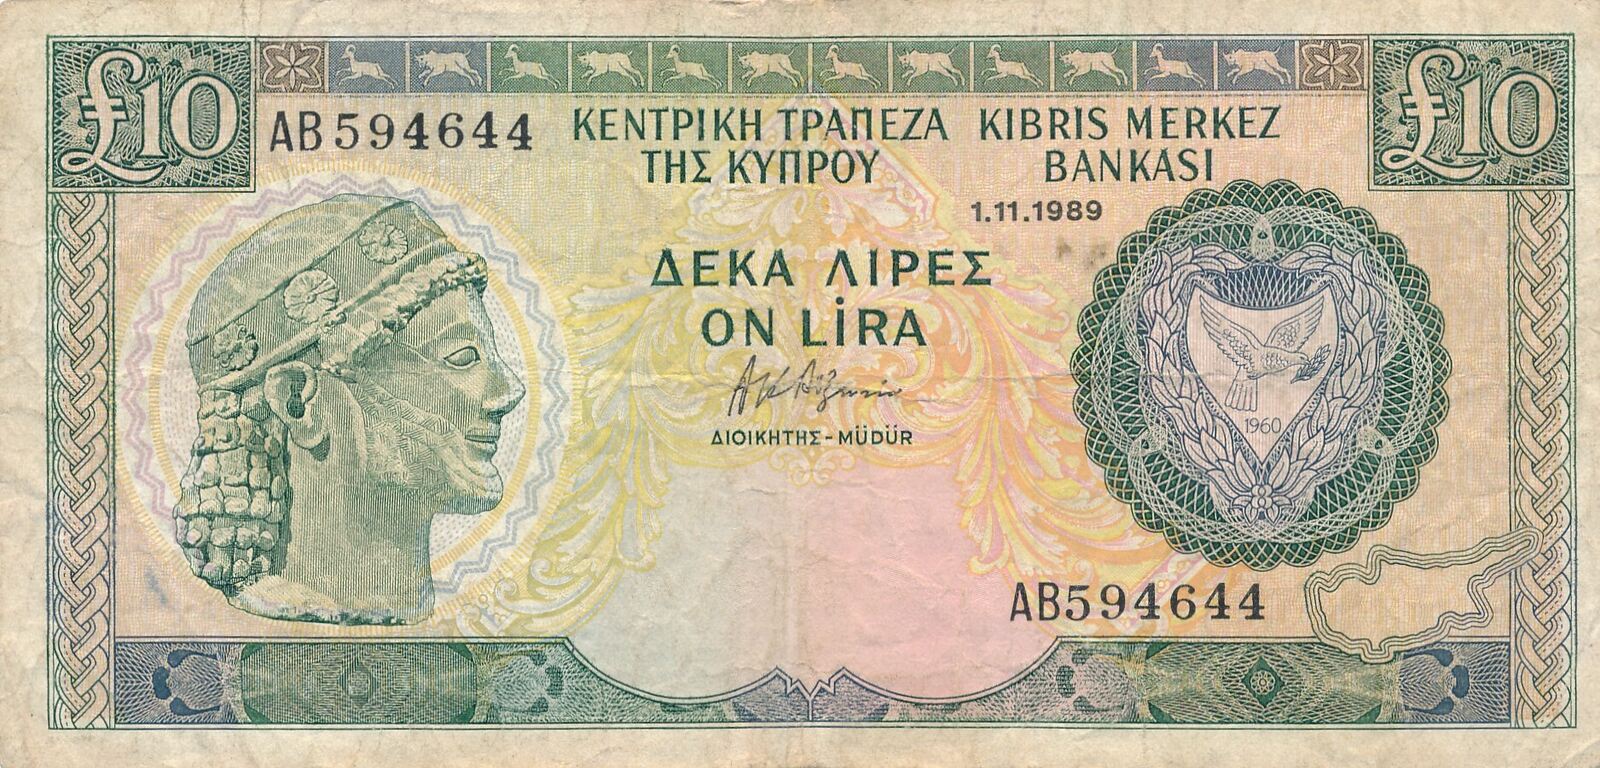 LIRA 1990 PMG 66 GEM UNCIRCULATED EPQ P.55a AE 795898 Details about   CYPRUS 10 POUND